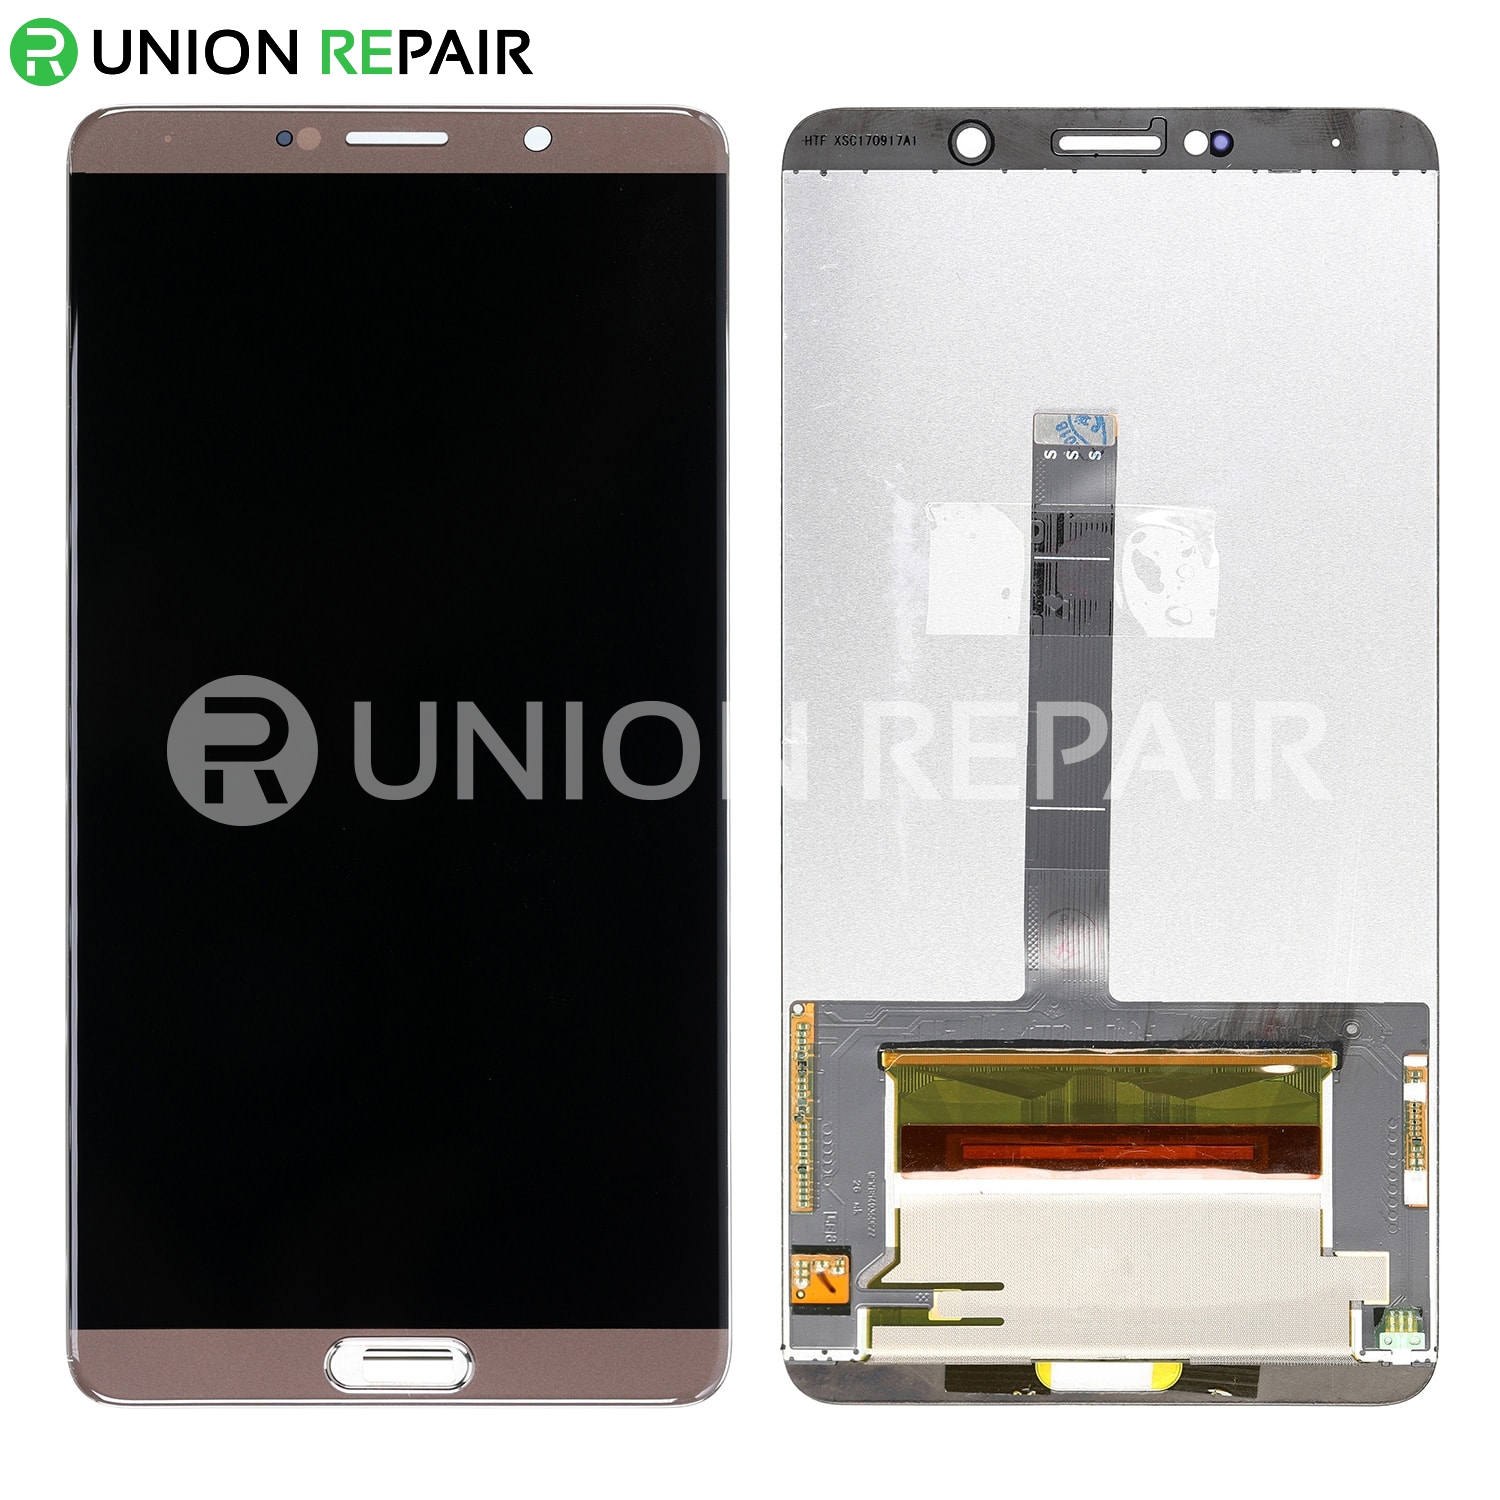 Replacement for Huawei Mate 10 LCD with Digitizer Assembly - Mocha Brown